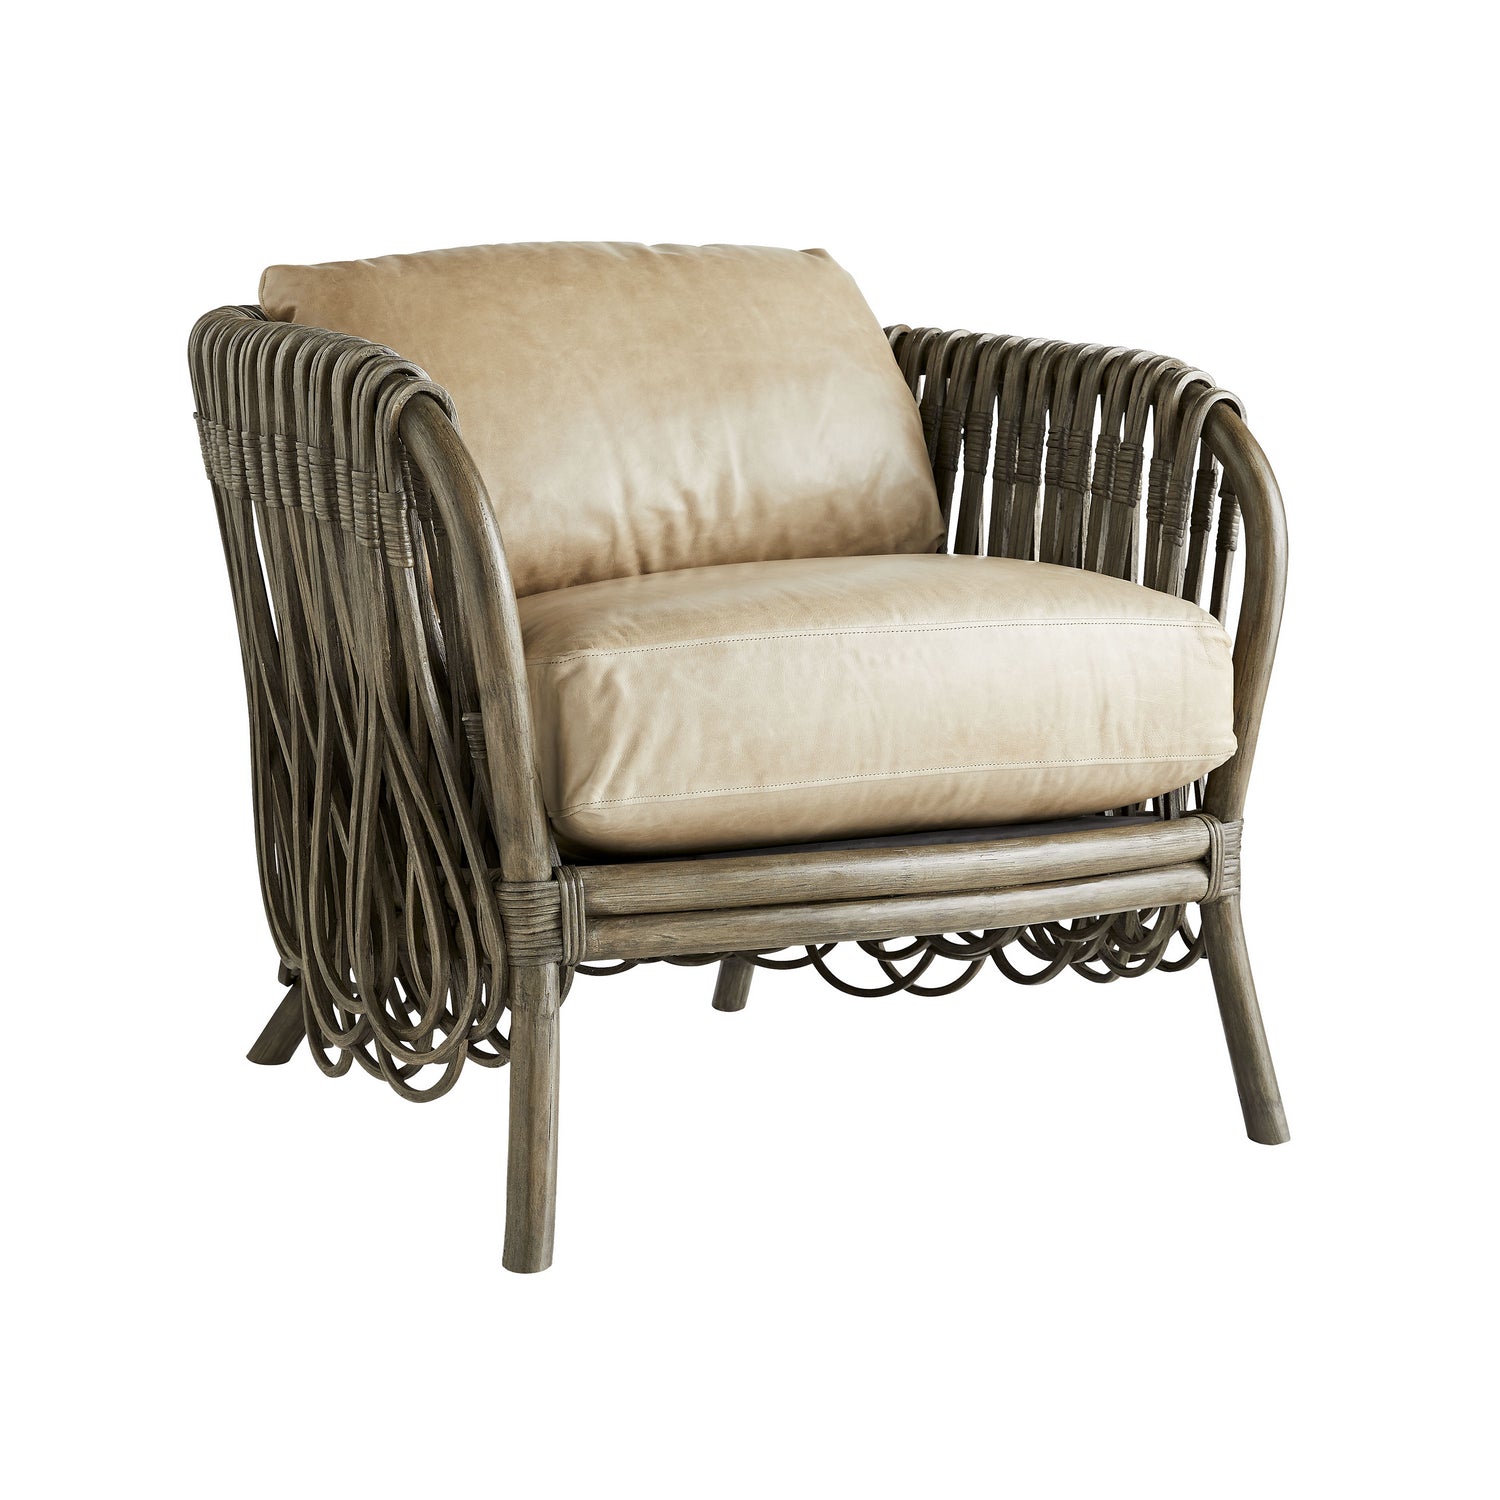 Chair from the Strata collection in Gray Wash finish